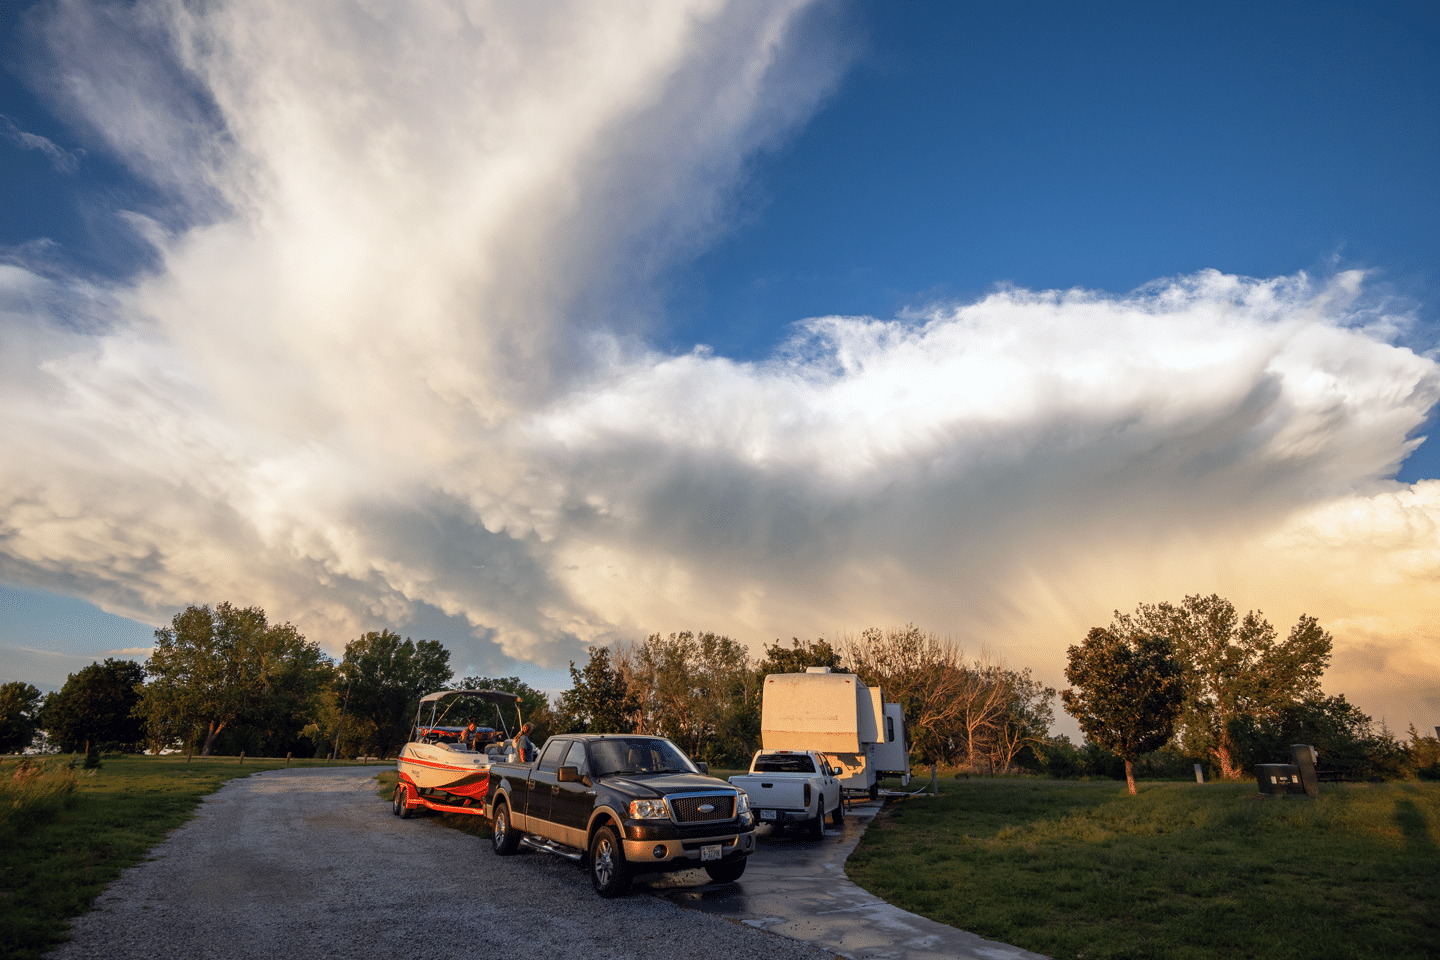 storm clouds rolling above a campground where a camper, truck and boat are parked